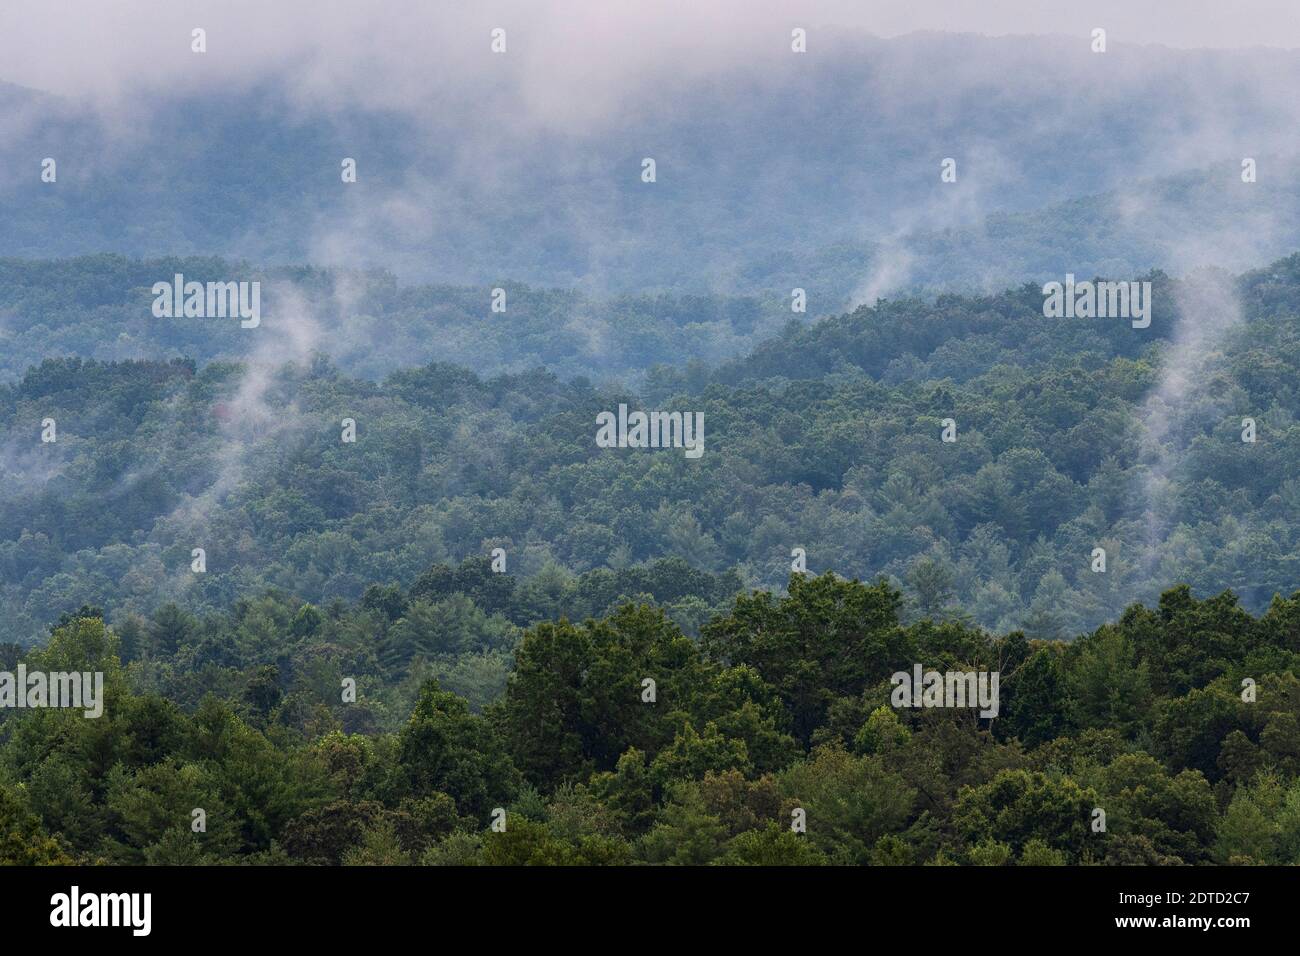 MORNING MIST RISES FROM THE FOREST, BLUE RIDGE MOUNTAINS, GA, USA Stock Photo